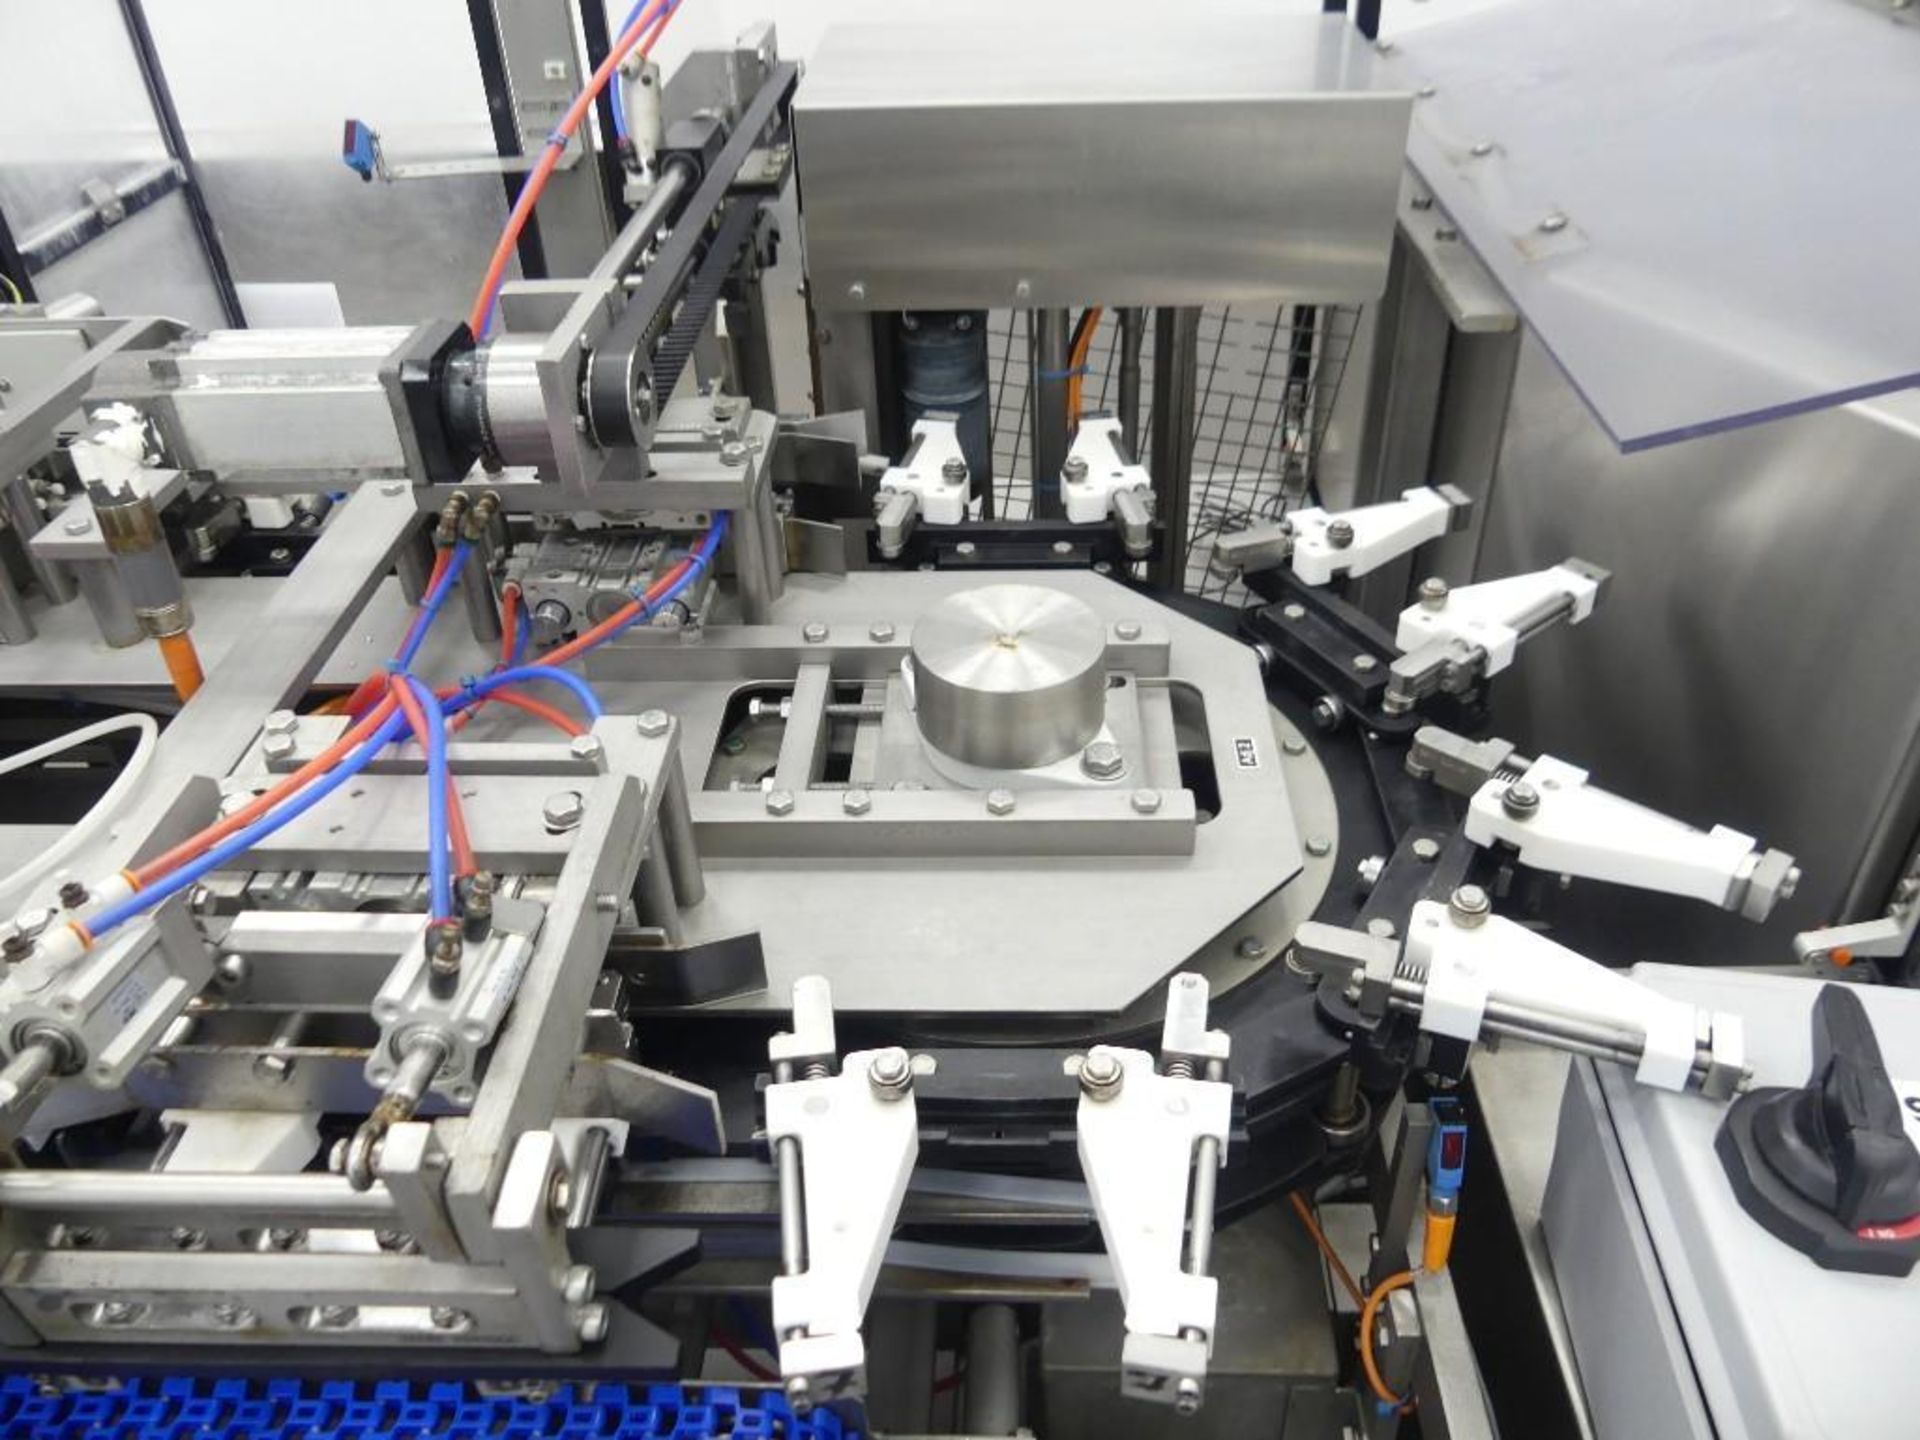 Massman HFFS-IM1000 Flexible Pouch Packaging System - Image 46 of 127